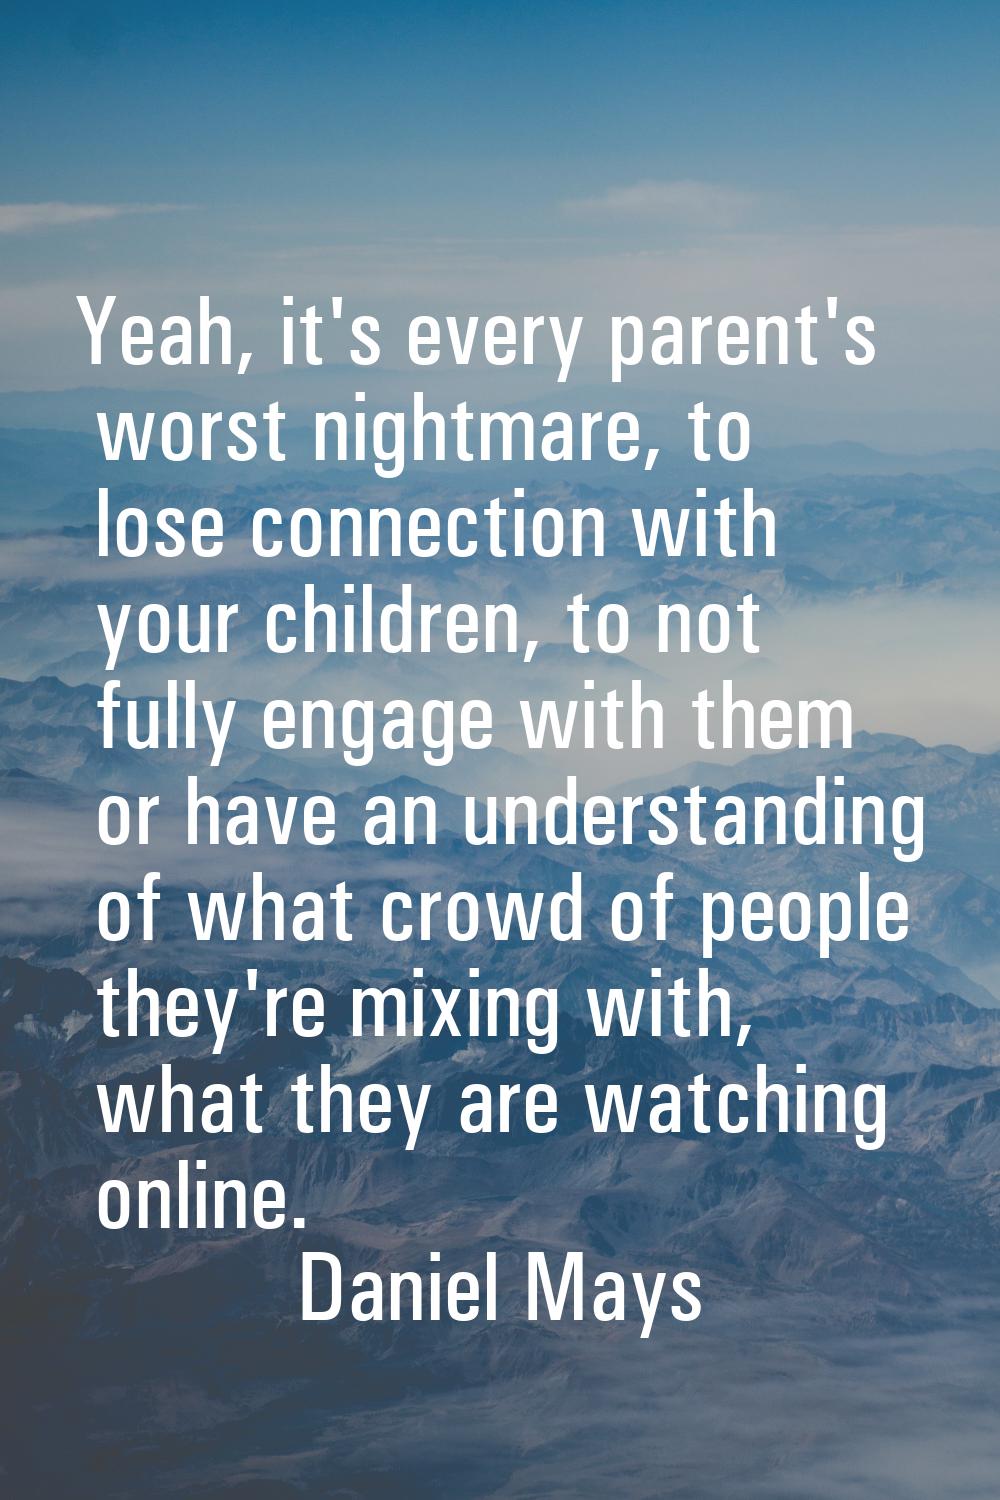 Yeah, it's every parent's worst nightmare, to lose connection with your children, to not fully enga